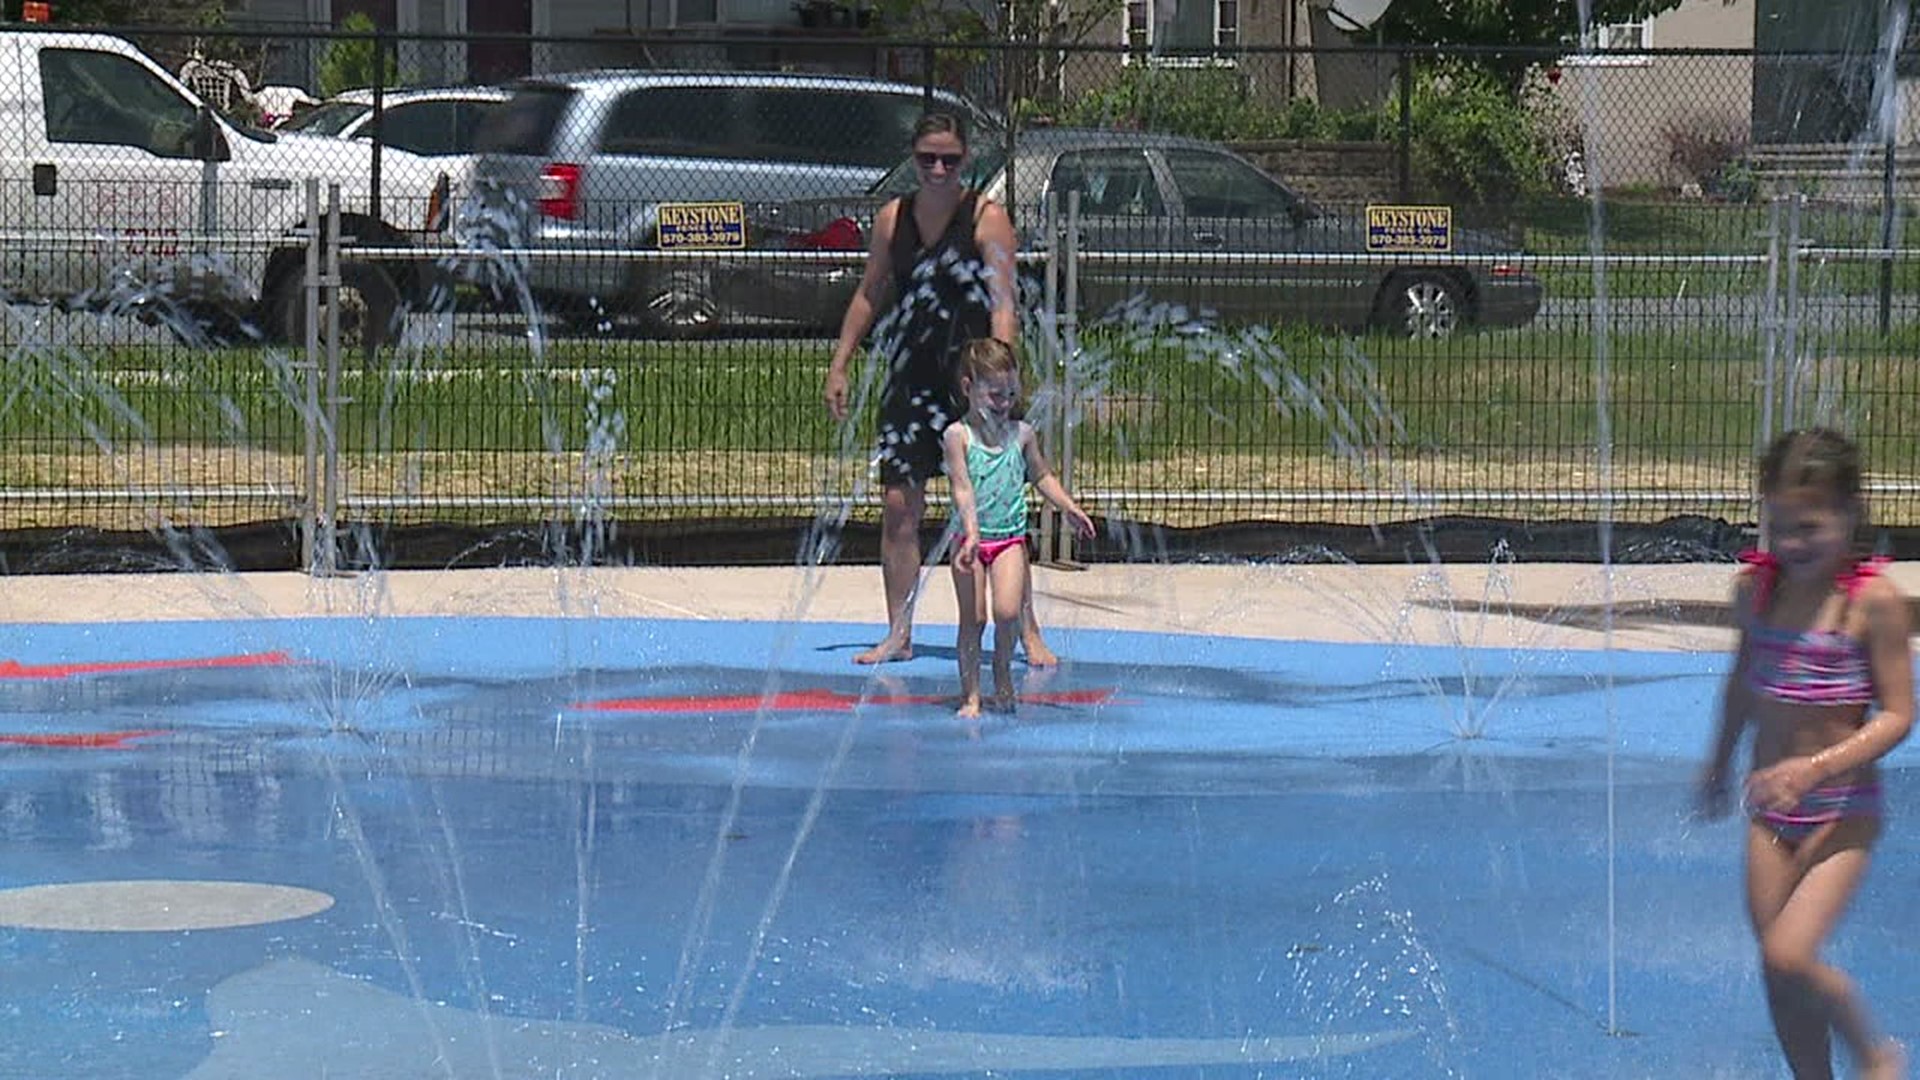 Kids, both young and old, couldn't wait to make a splash at the Novembrino Complex in West Side.